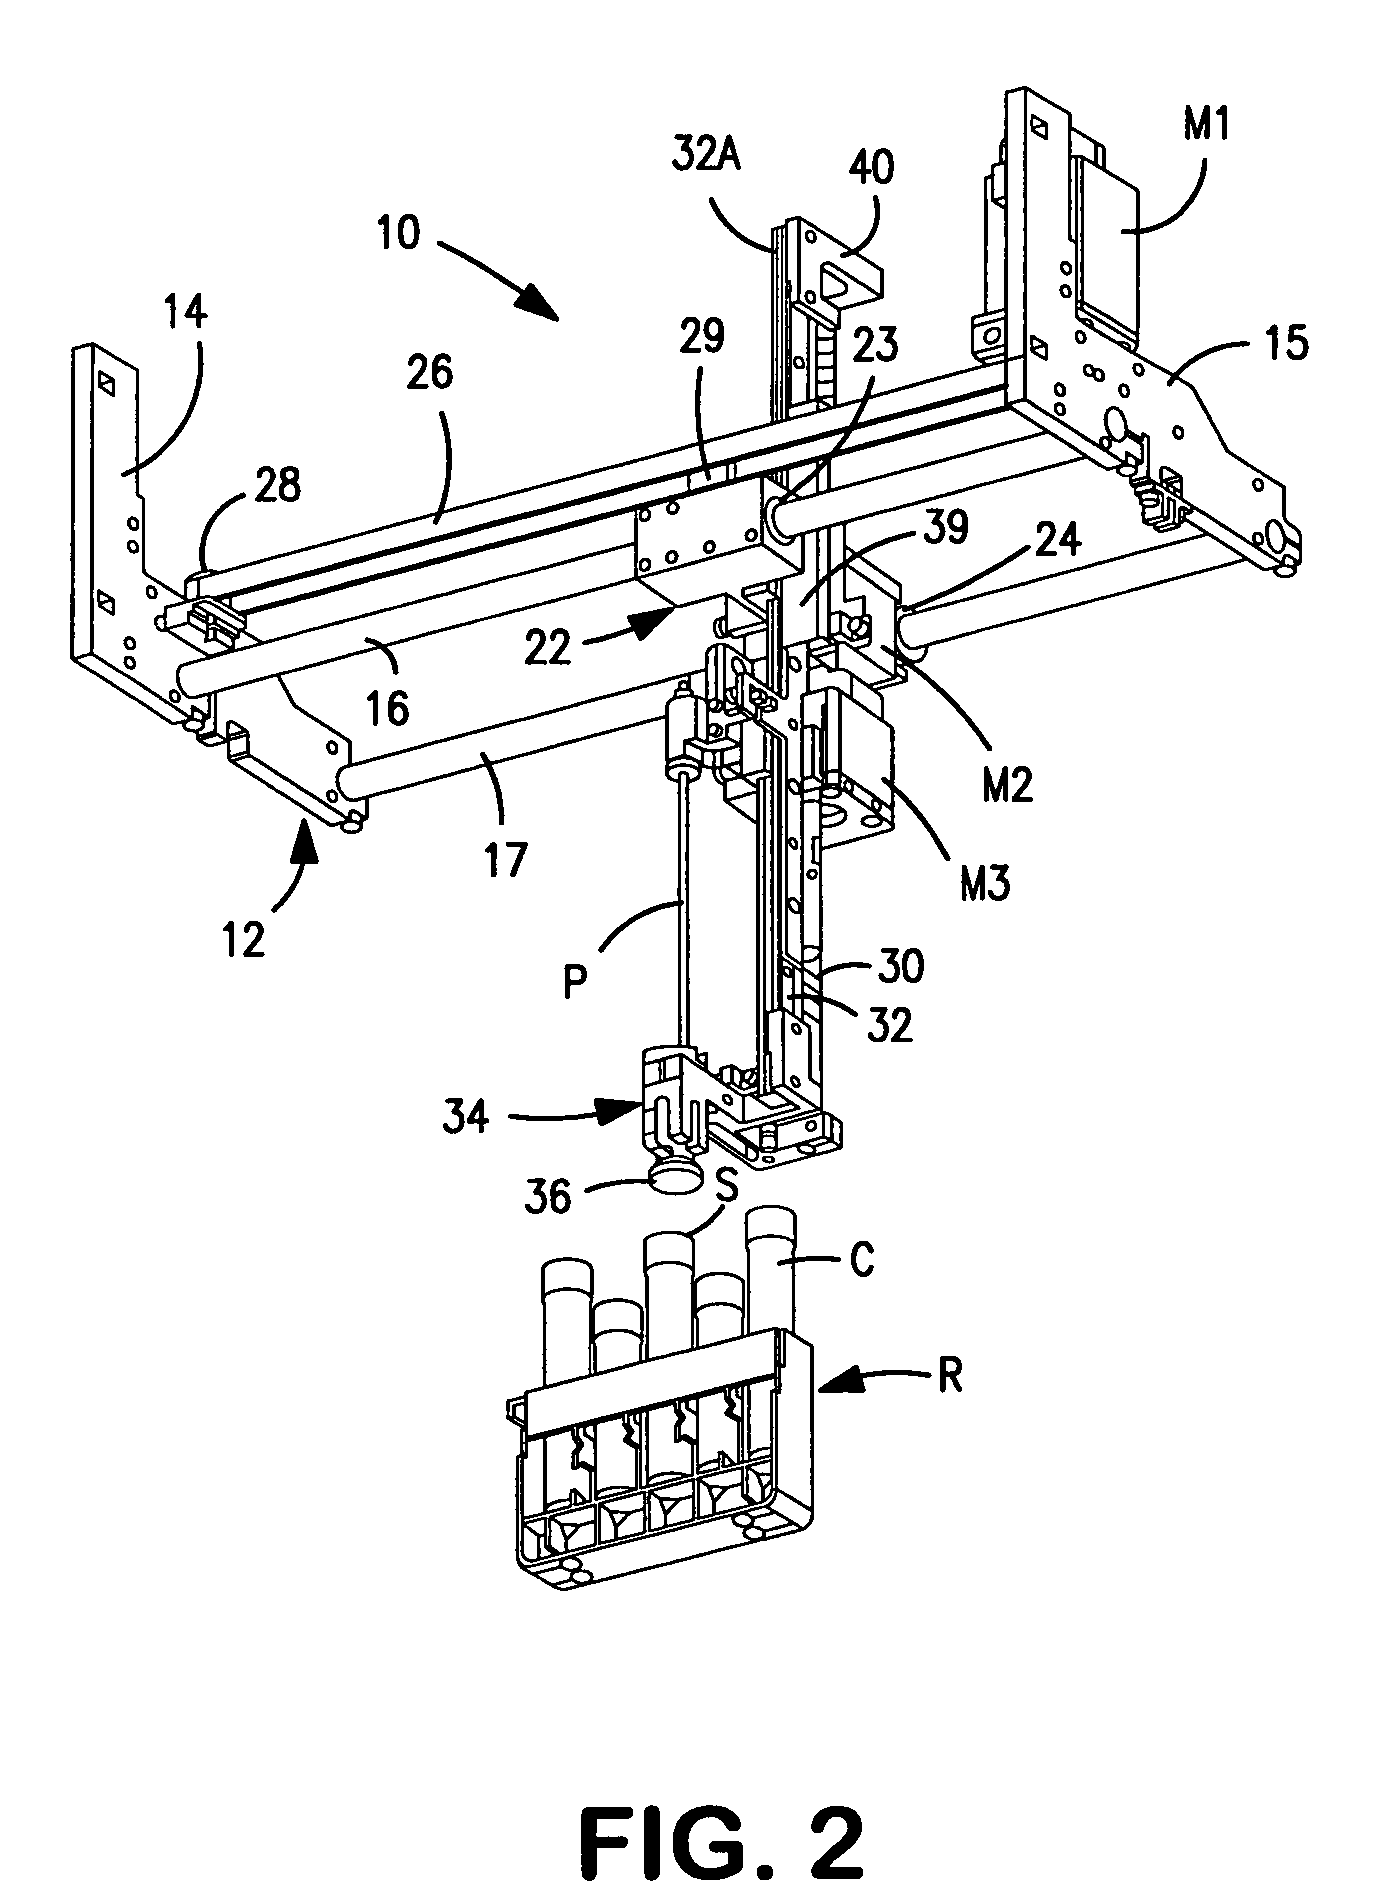 Apparatus for aspirating liquids from sealed containers